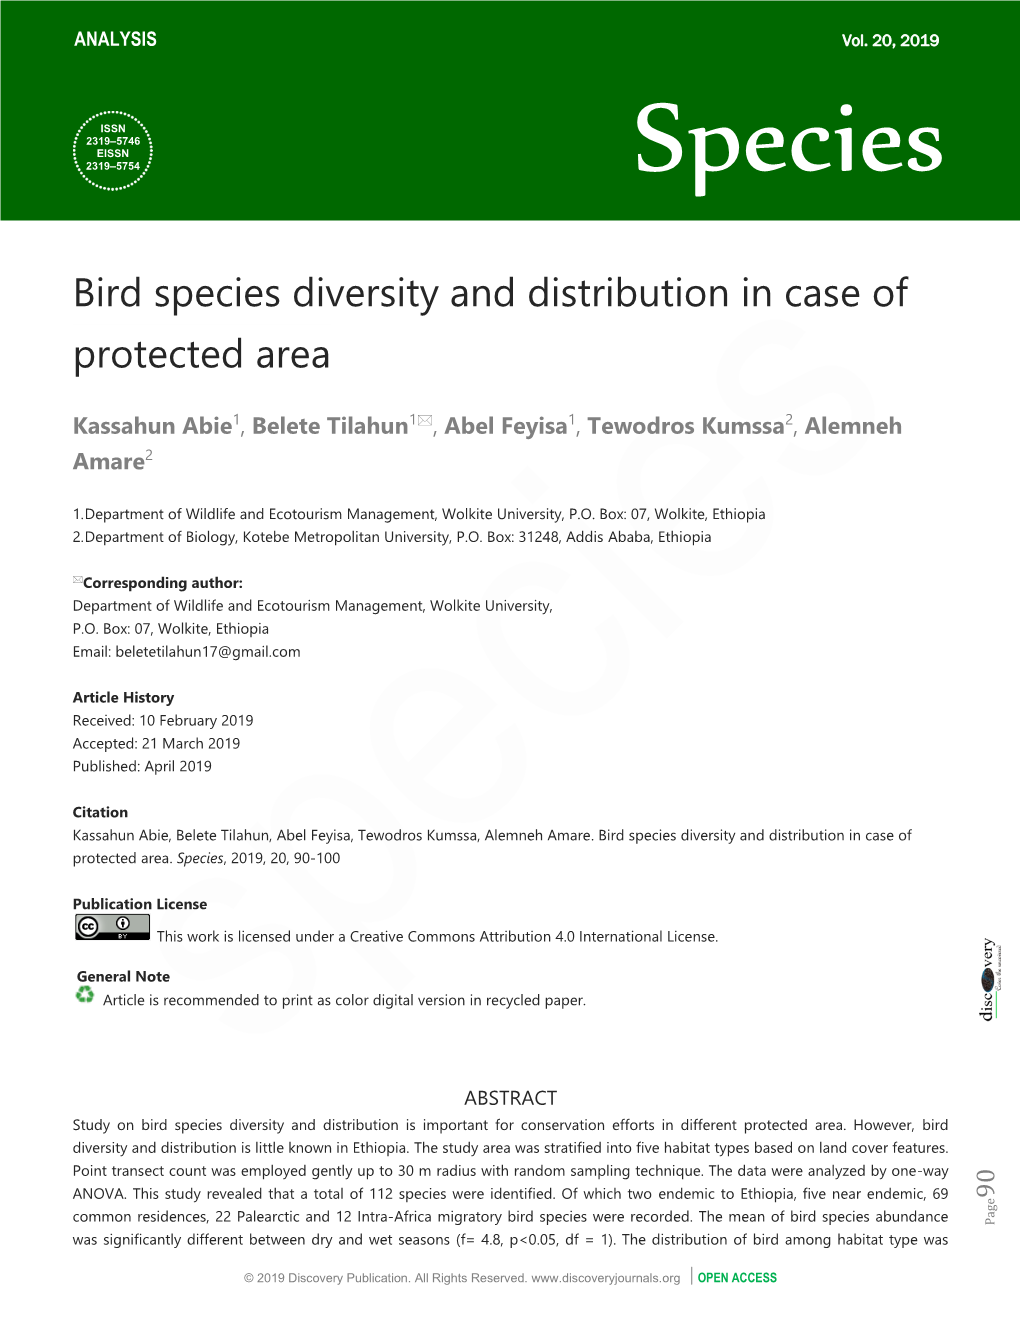 Bird Species Diversity and Distribution in Case of Protected Area